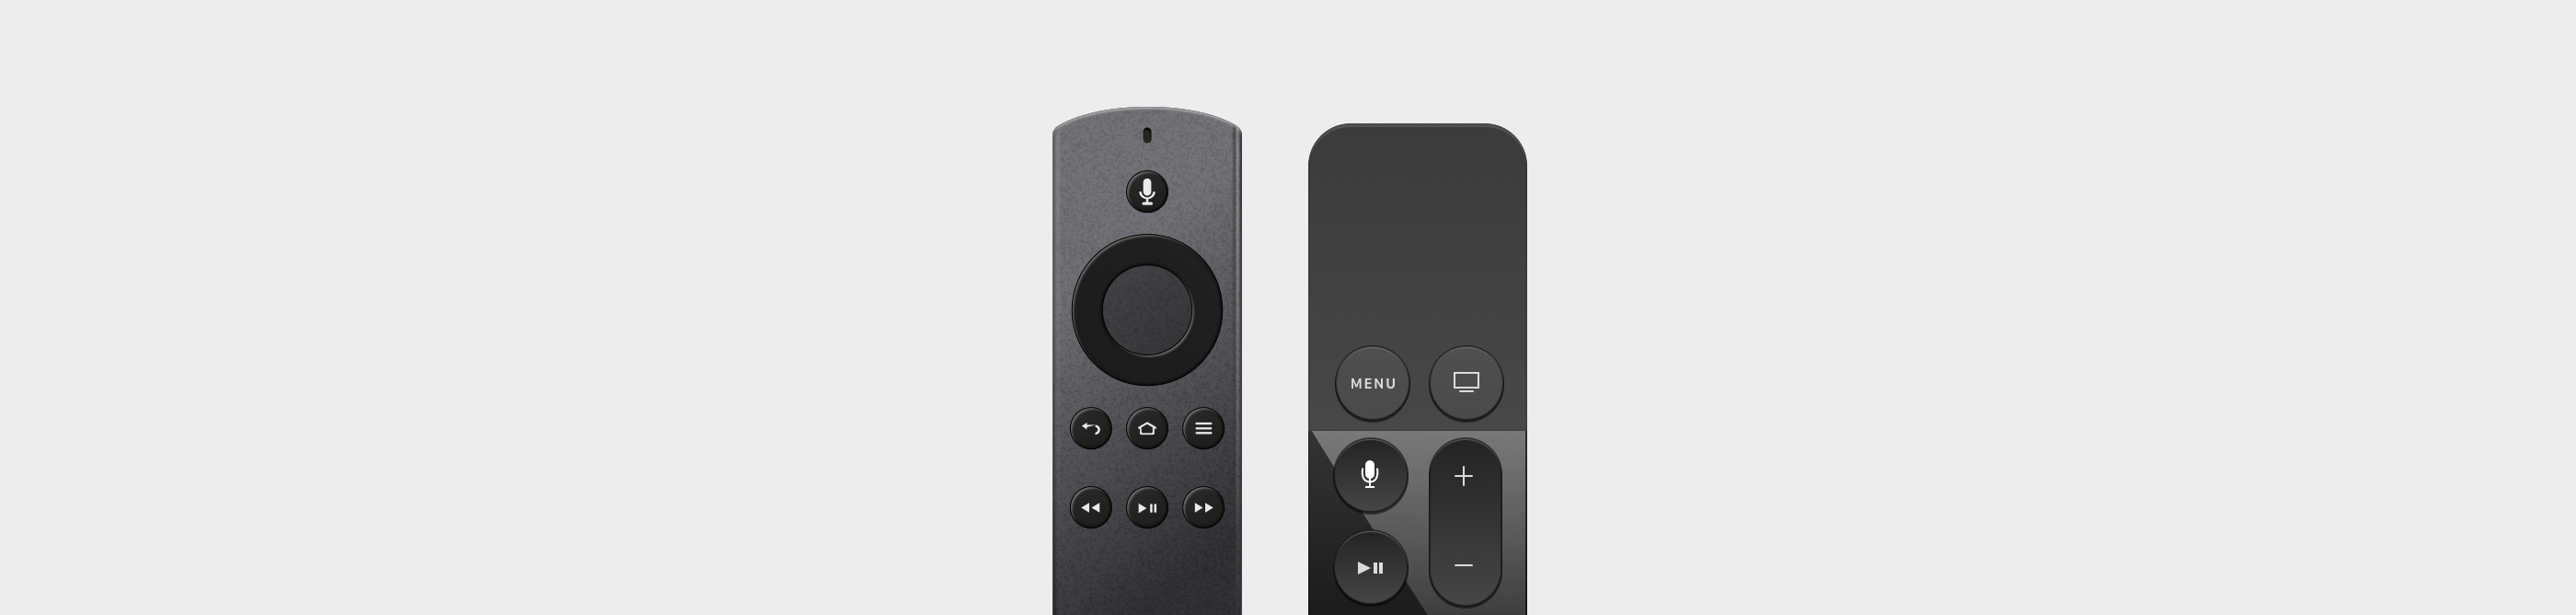 Remote control for Android TV and Apple TV